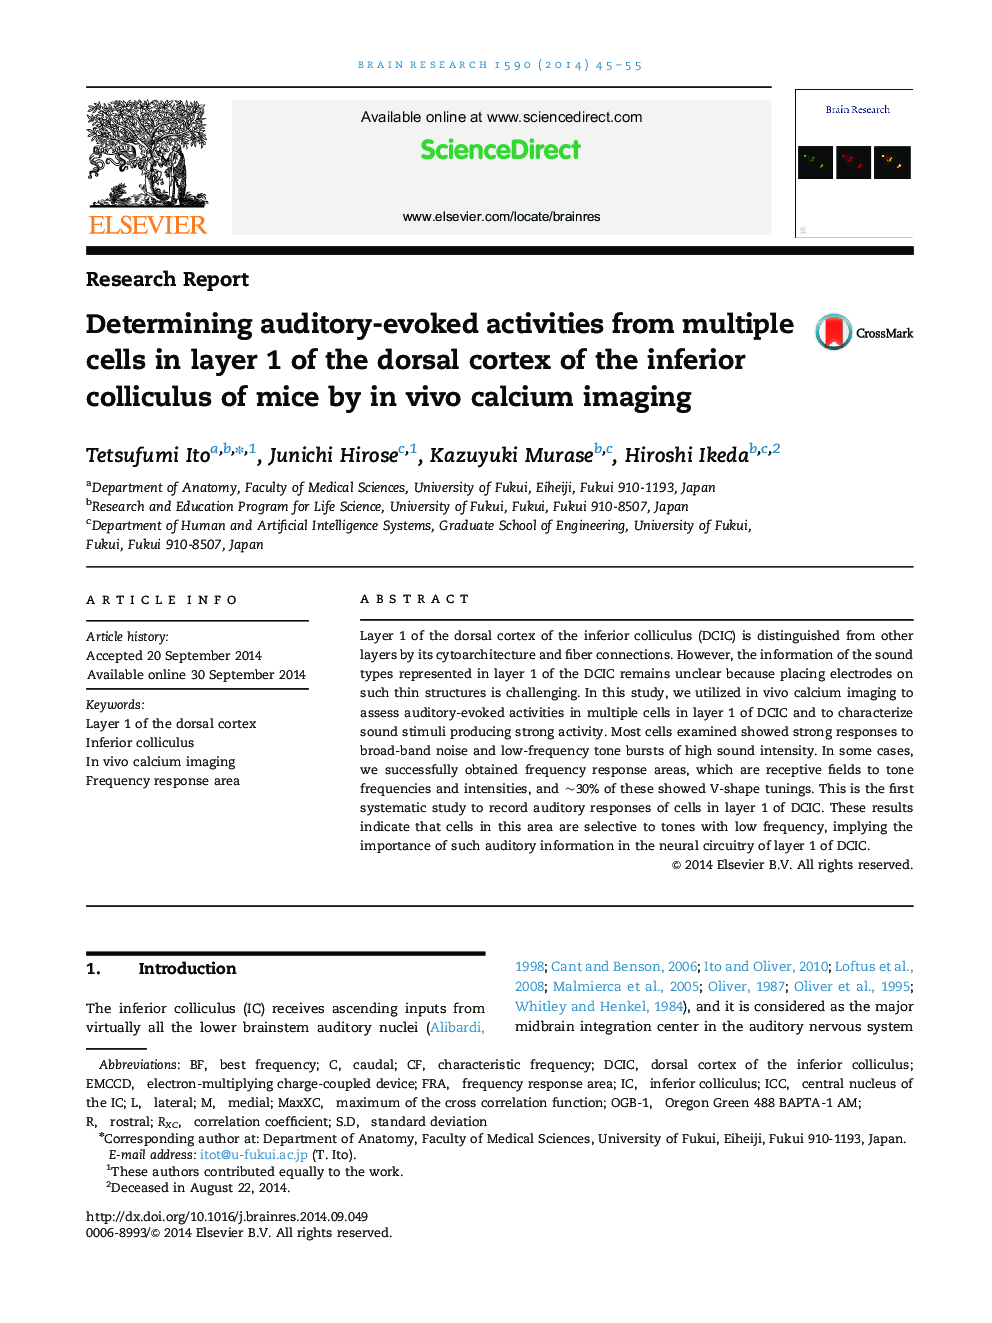 Determining auditory-evoked activities from multiple cells in layer 1 of the dorsal cortex of the inferior colliculus of mice by in vivo calcium imaging